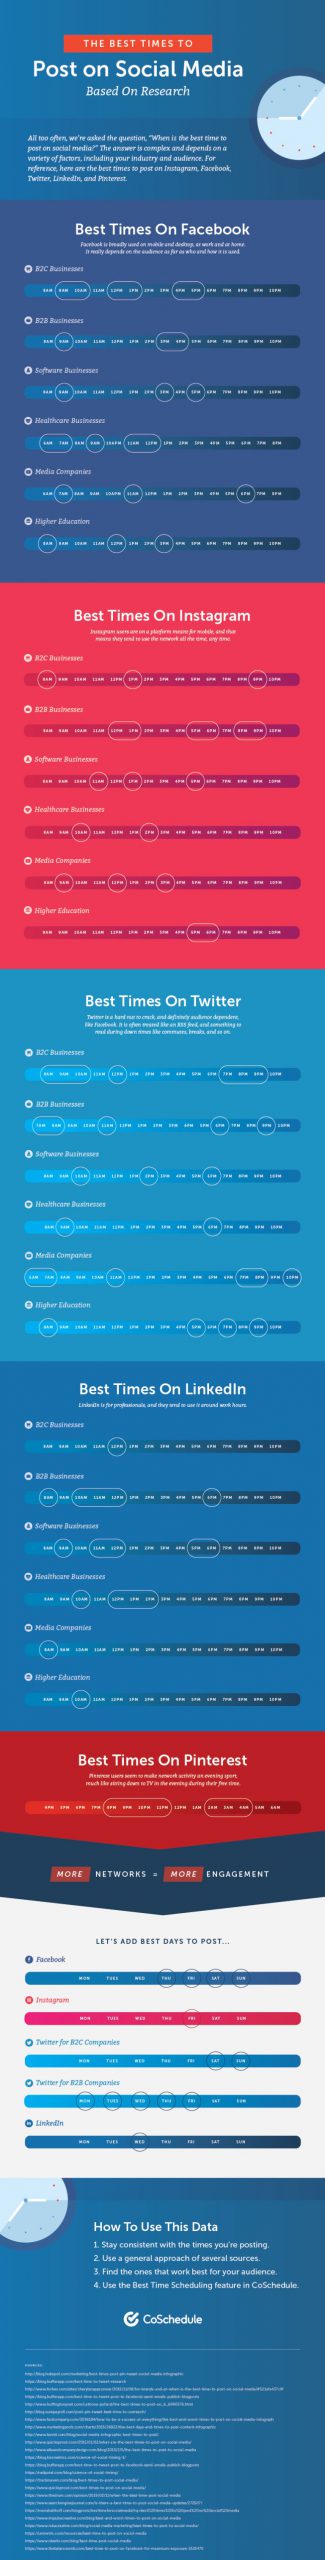 the best times to post on social media according to research infographic scaled 1